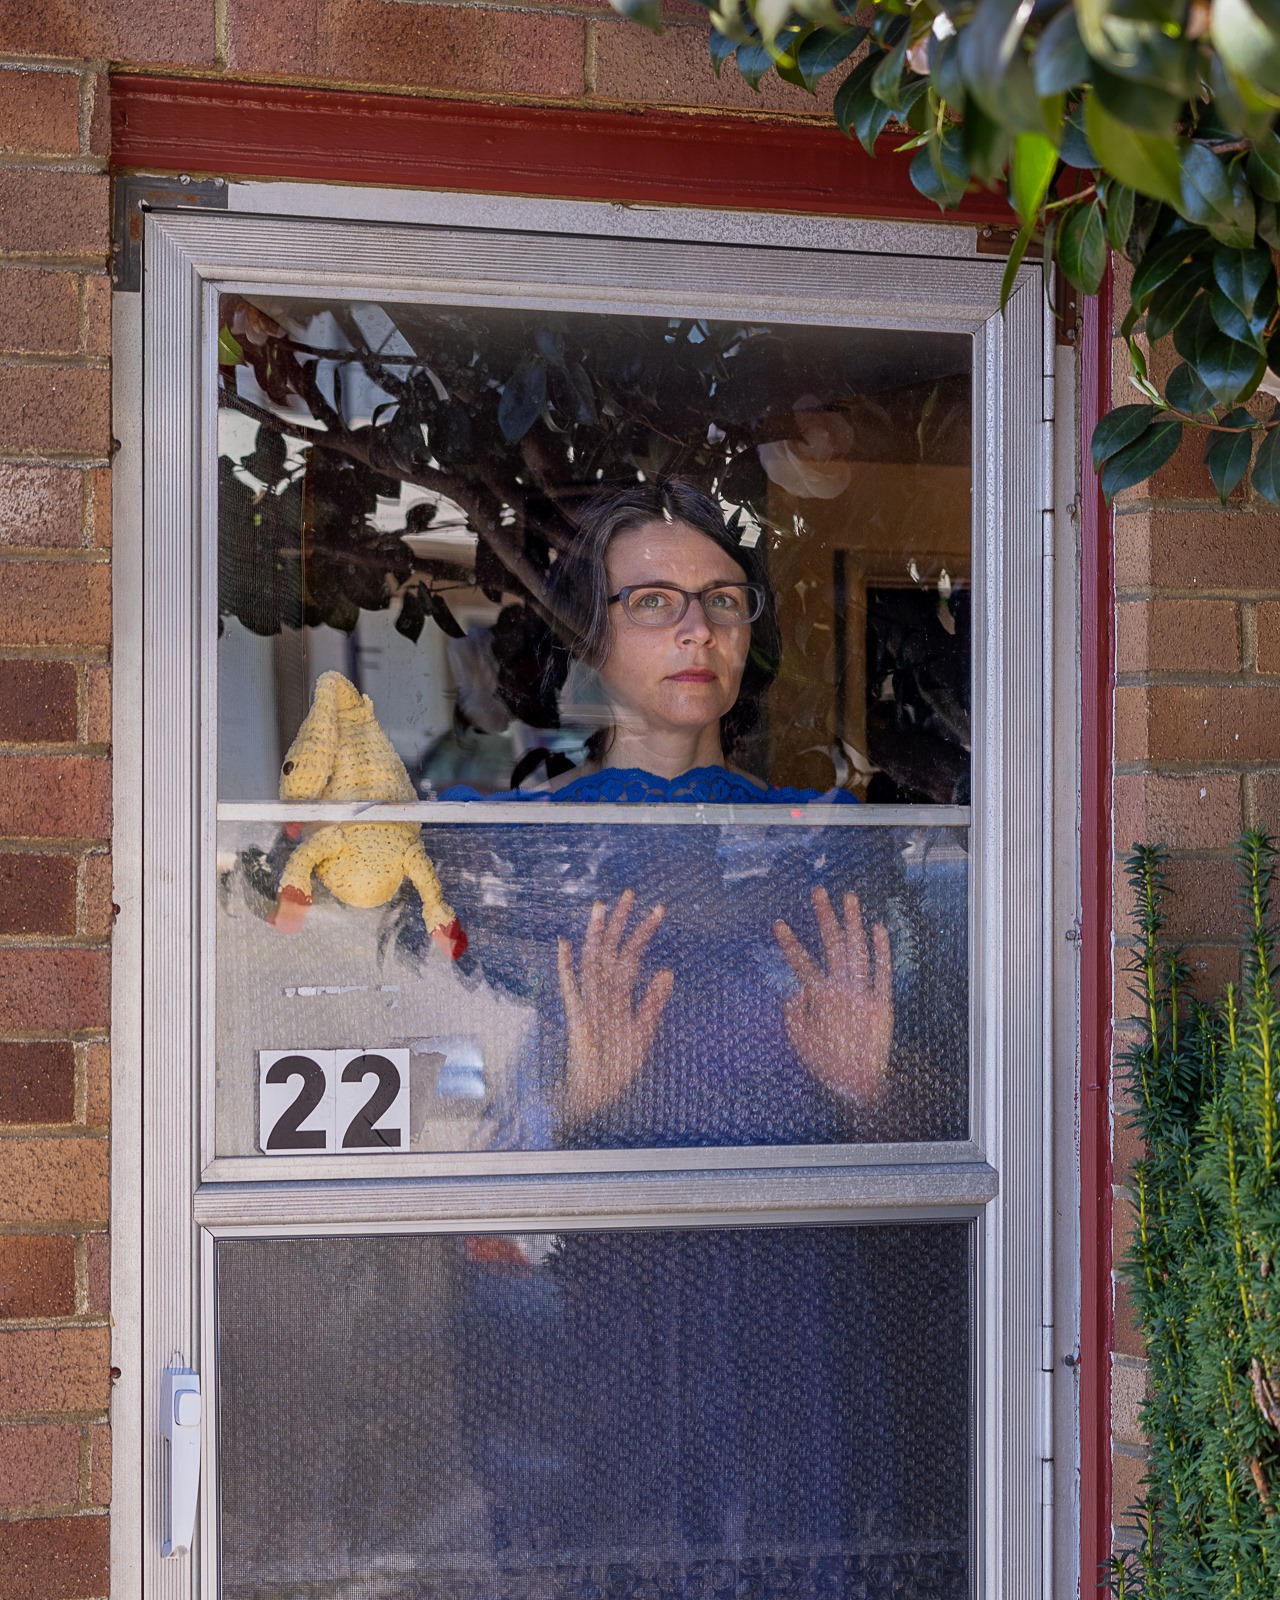 A woman in a blue dress looking through her screen door. There is a homemade, crocheted rubber chicken in the door as well.